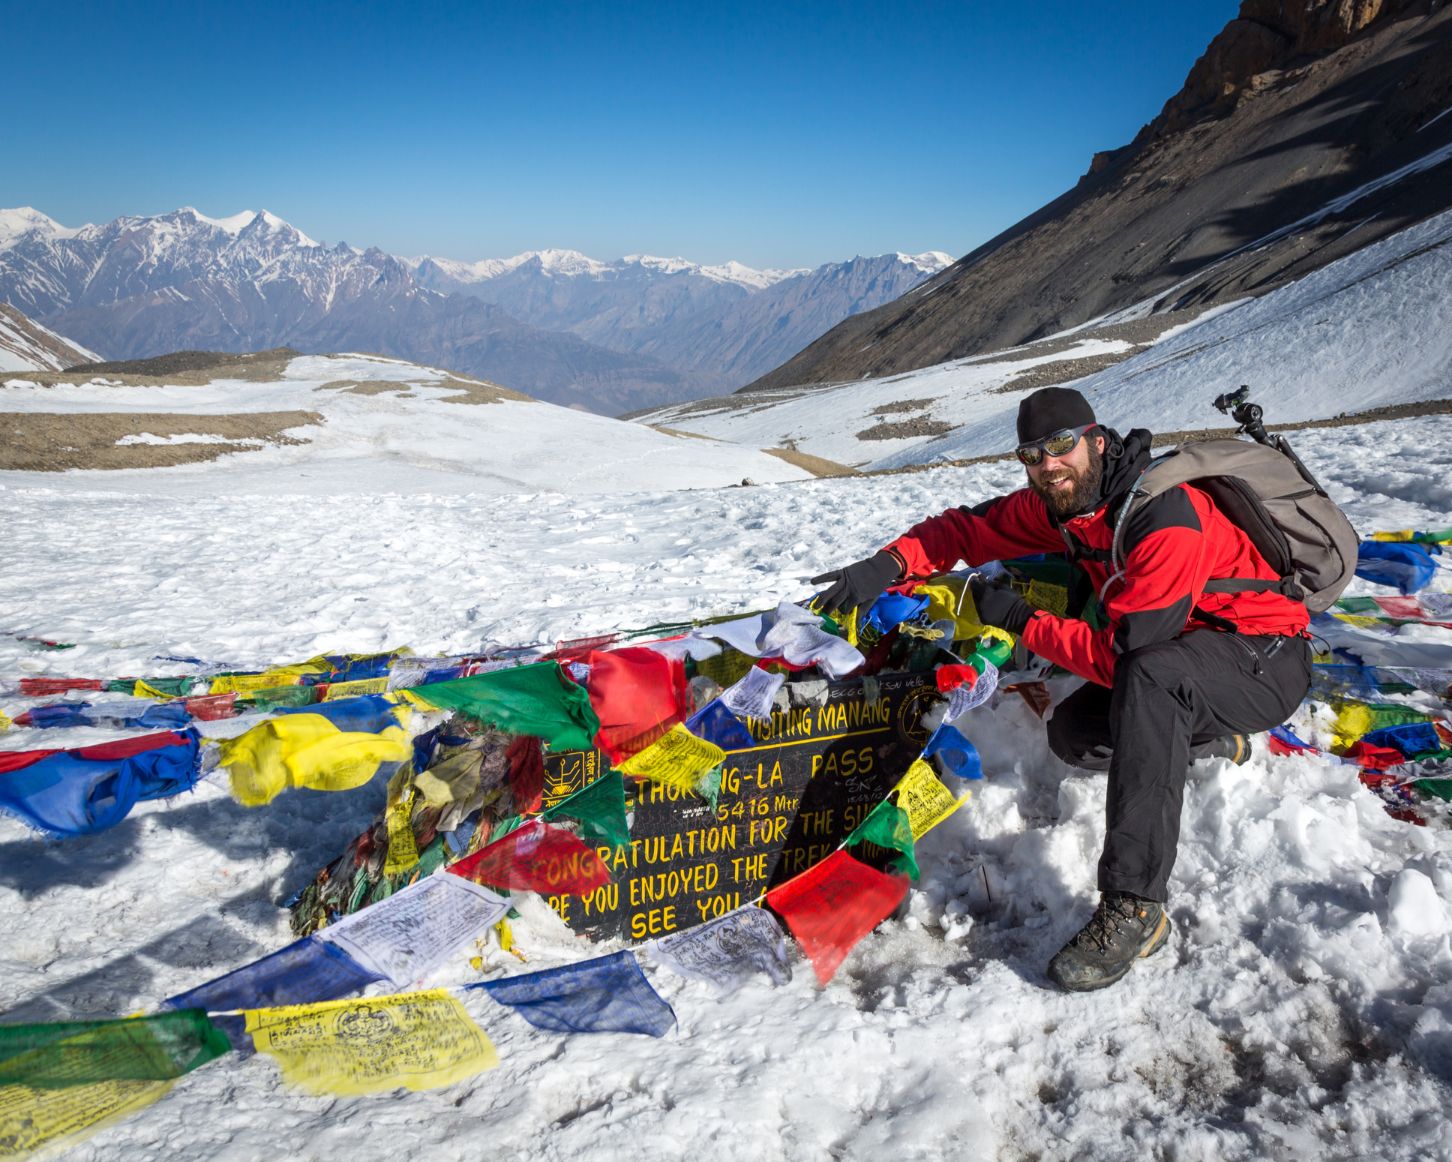 A hiker poses on the peak of Thorong La Pass, on Nepal's Annapurna circuit.